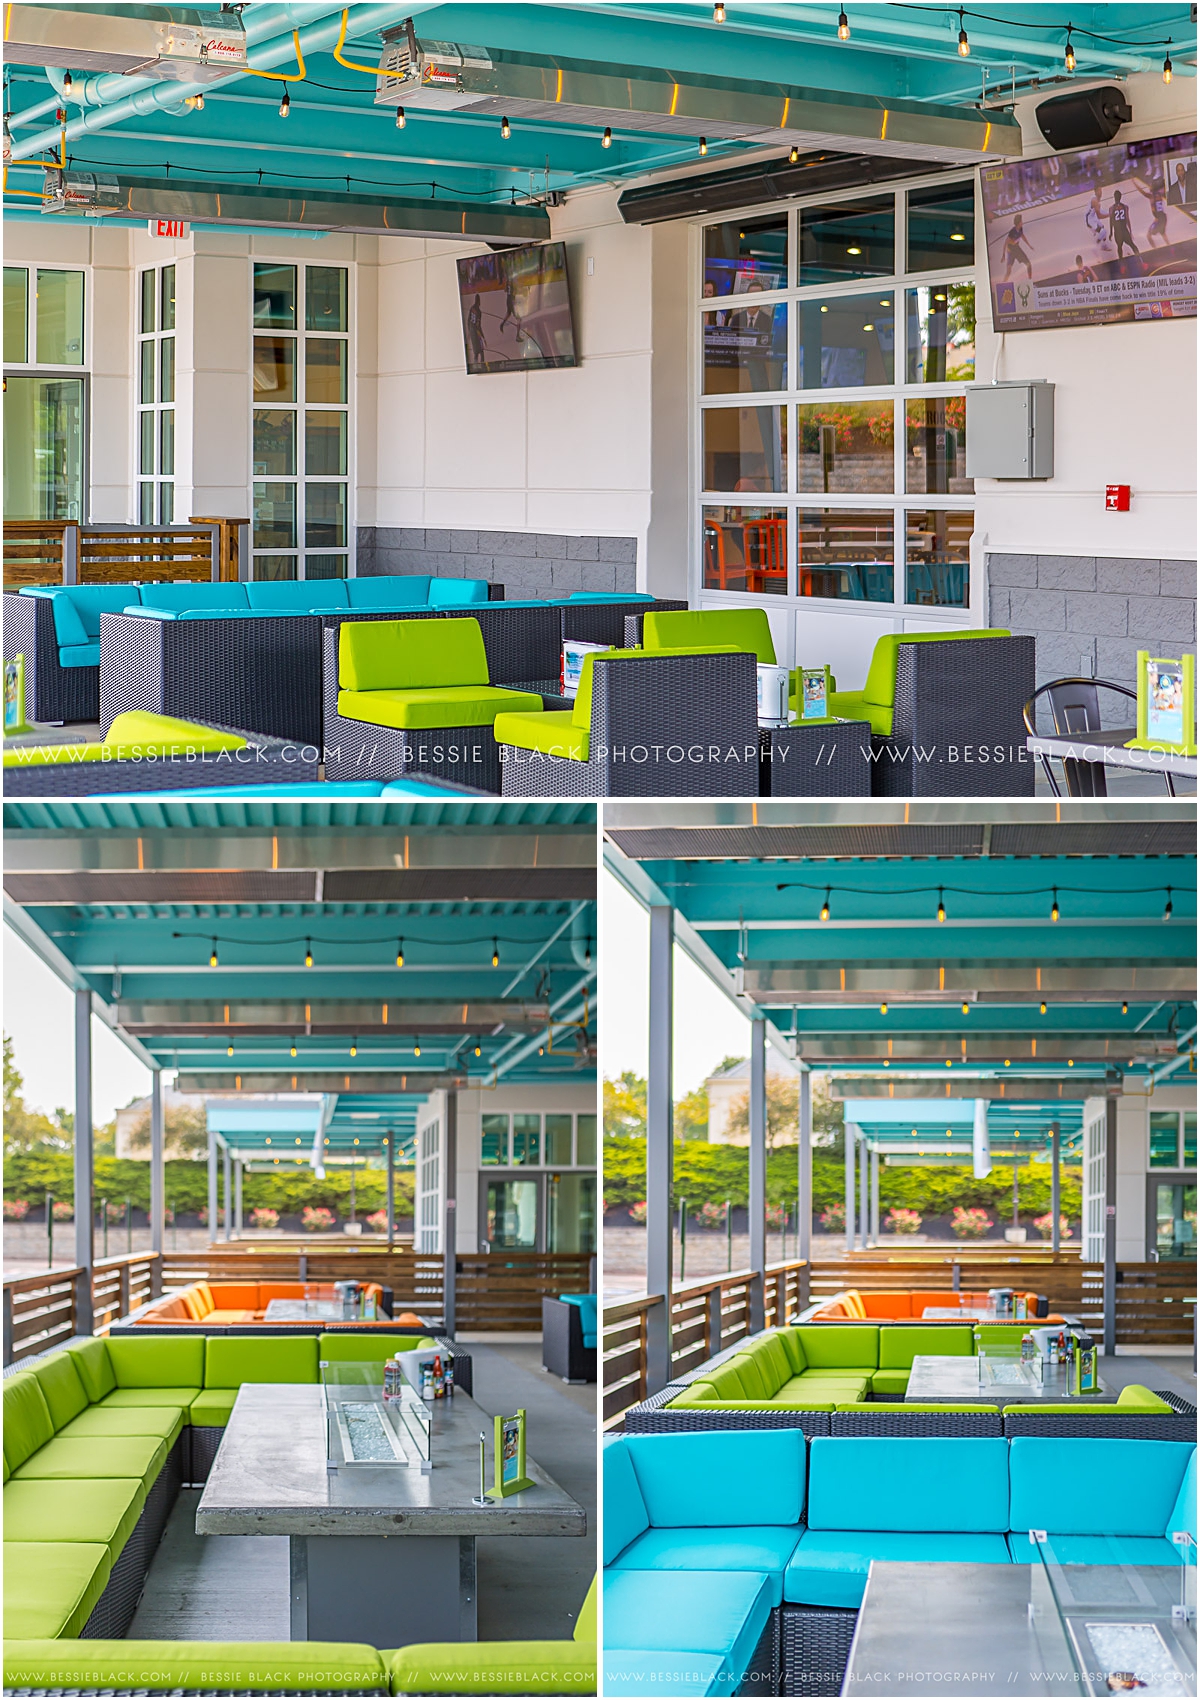 The restaurant's comfortable seating on display on the outdoor patio in splashes of blue and green cushioned booths. 